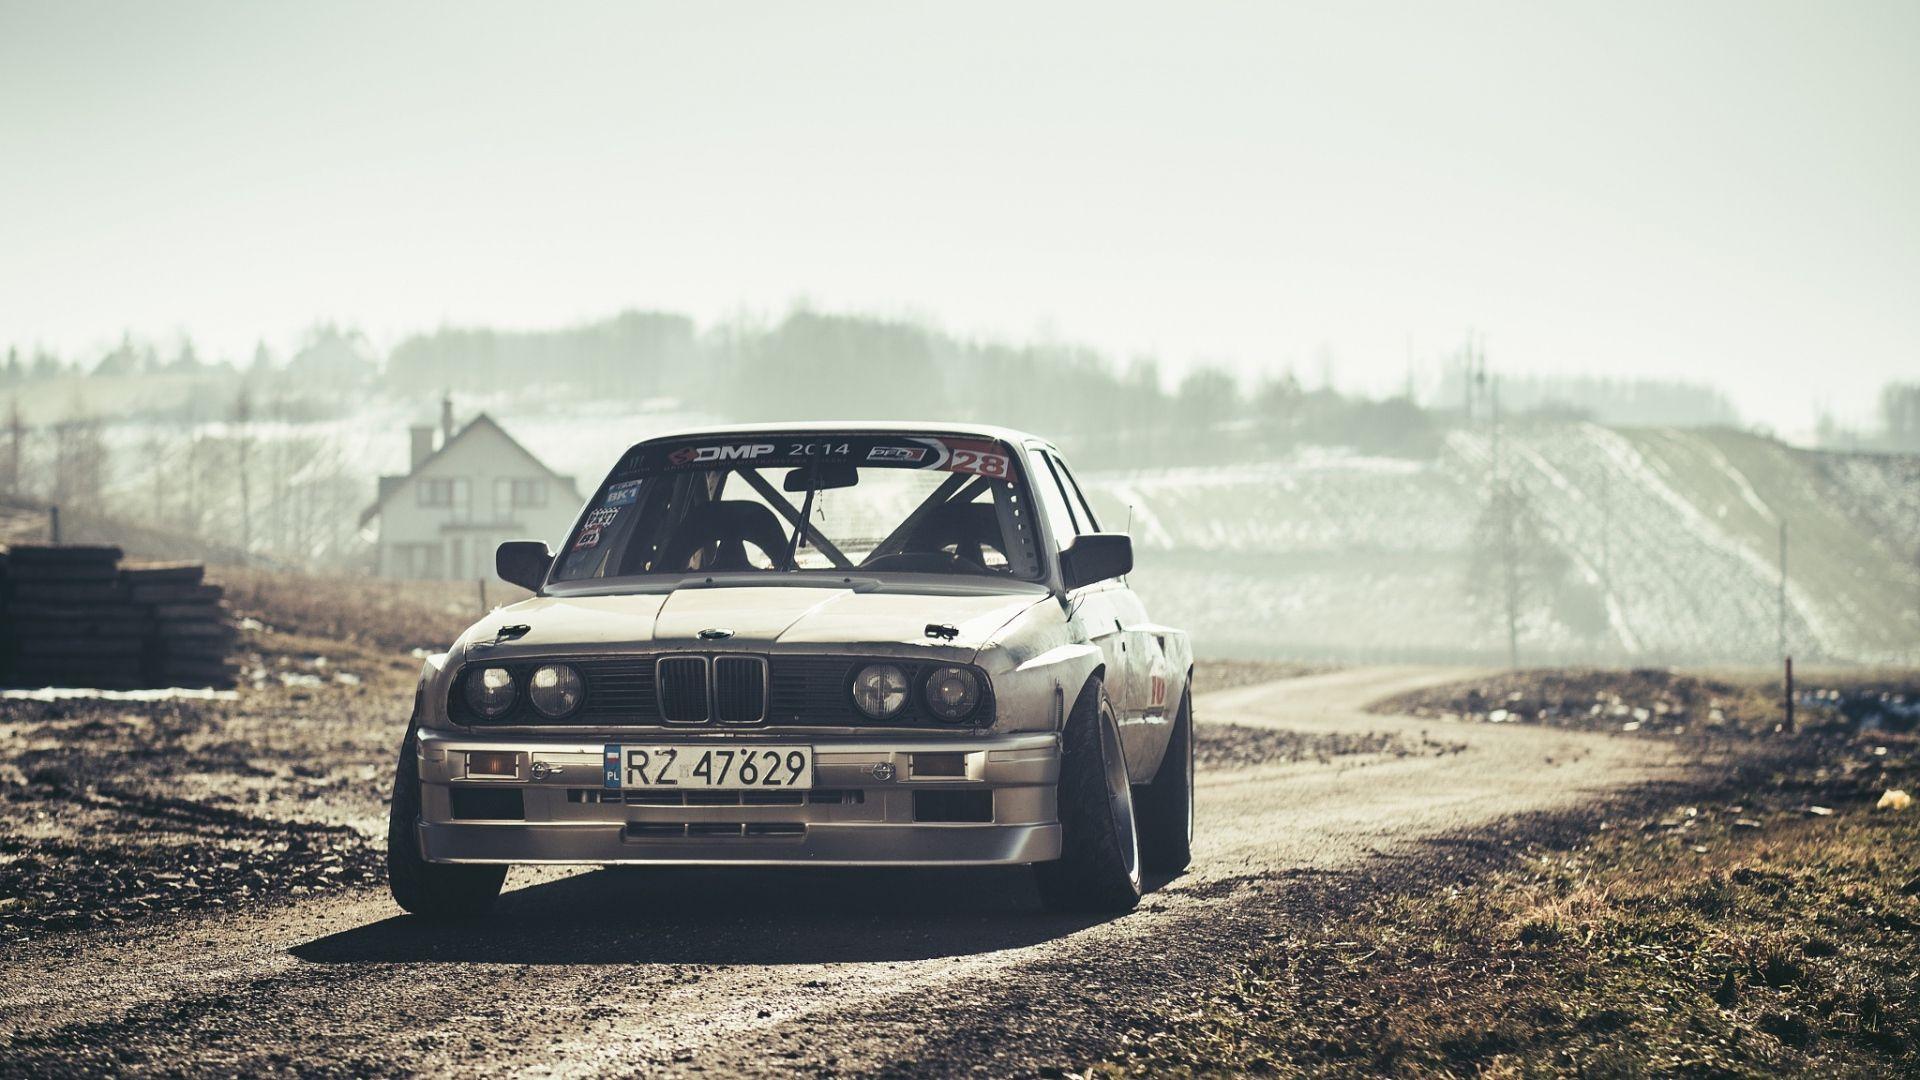 Bmw E30 Image for PC & Mac, Laptop, Tablet, Mobile Phone